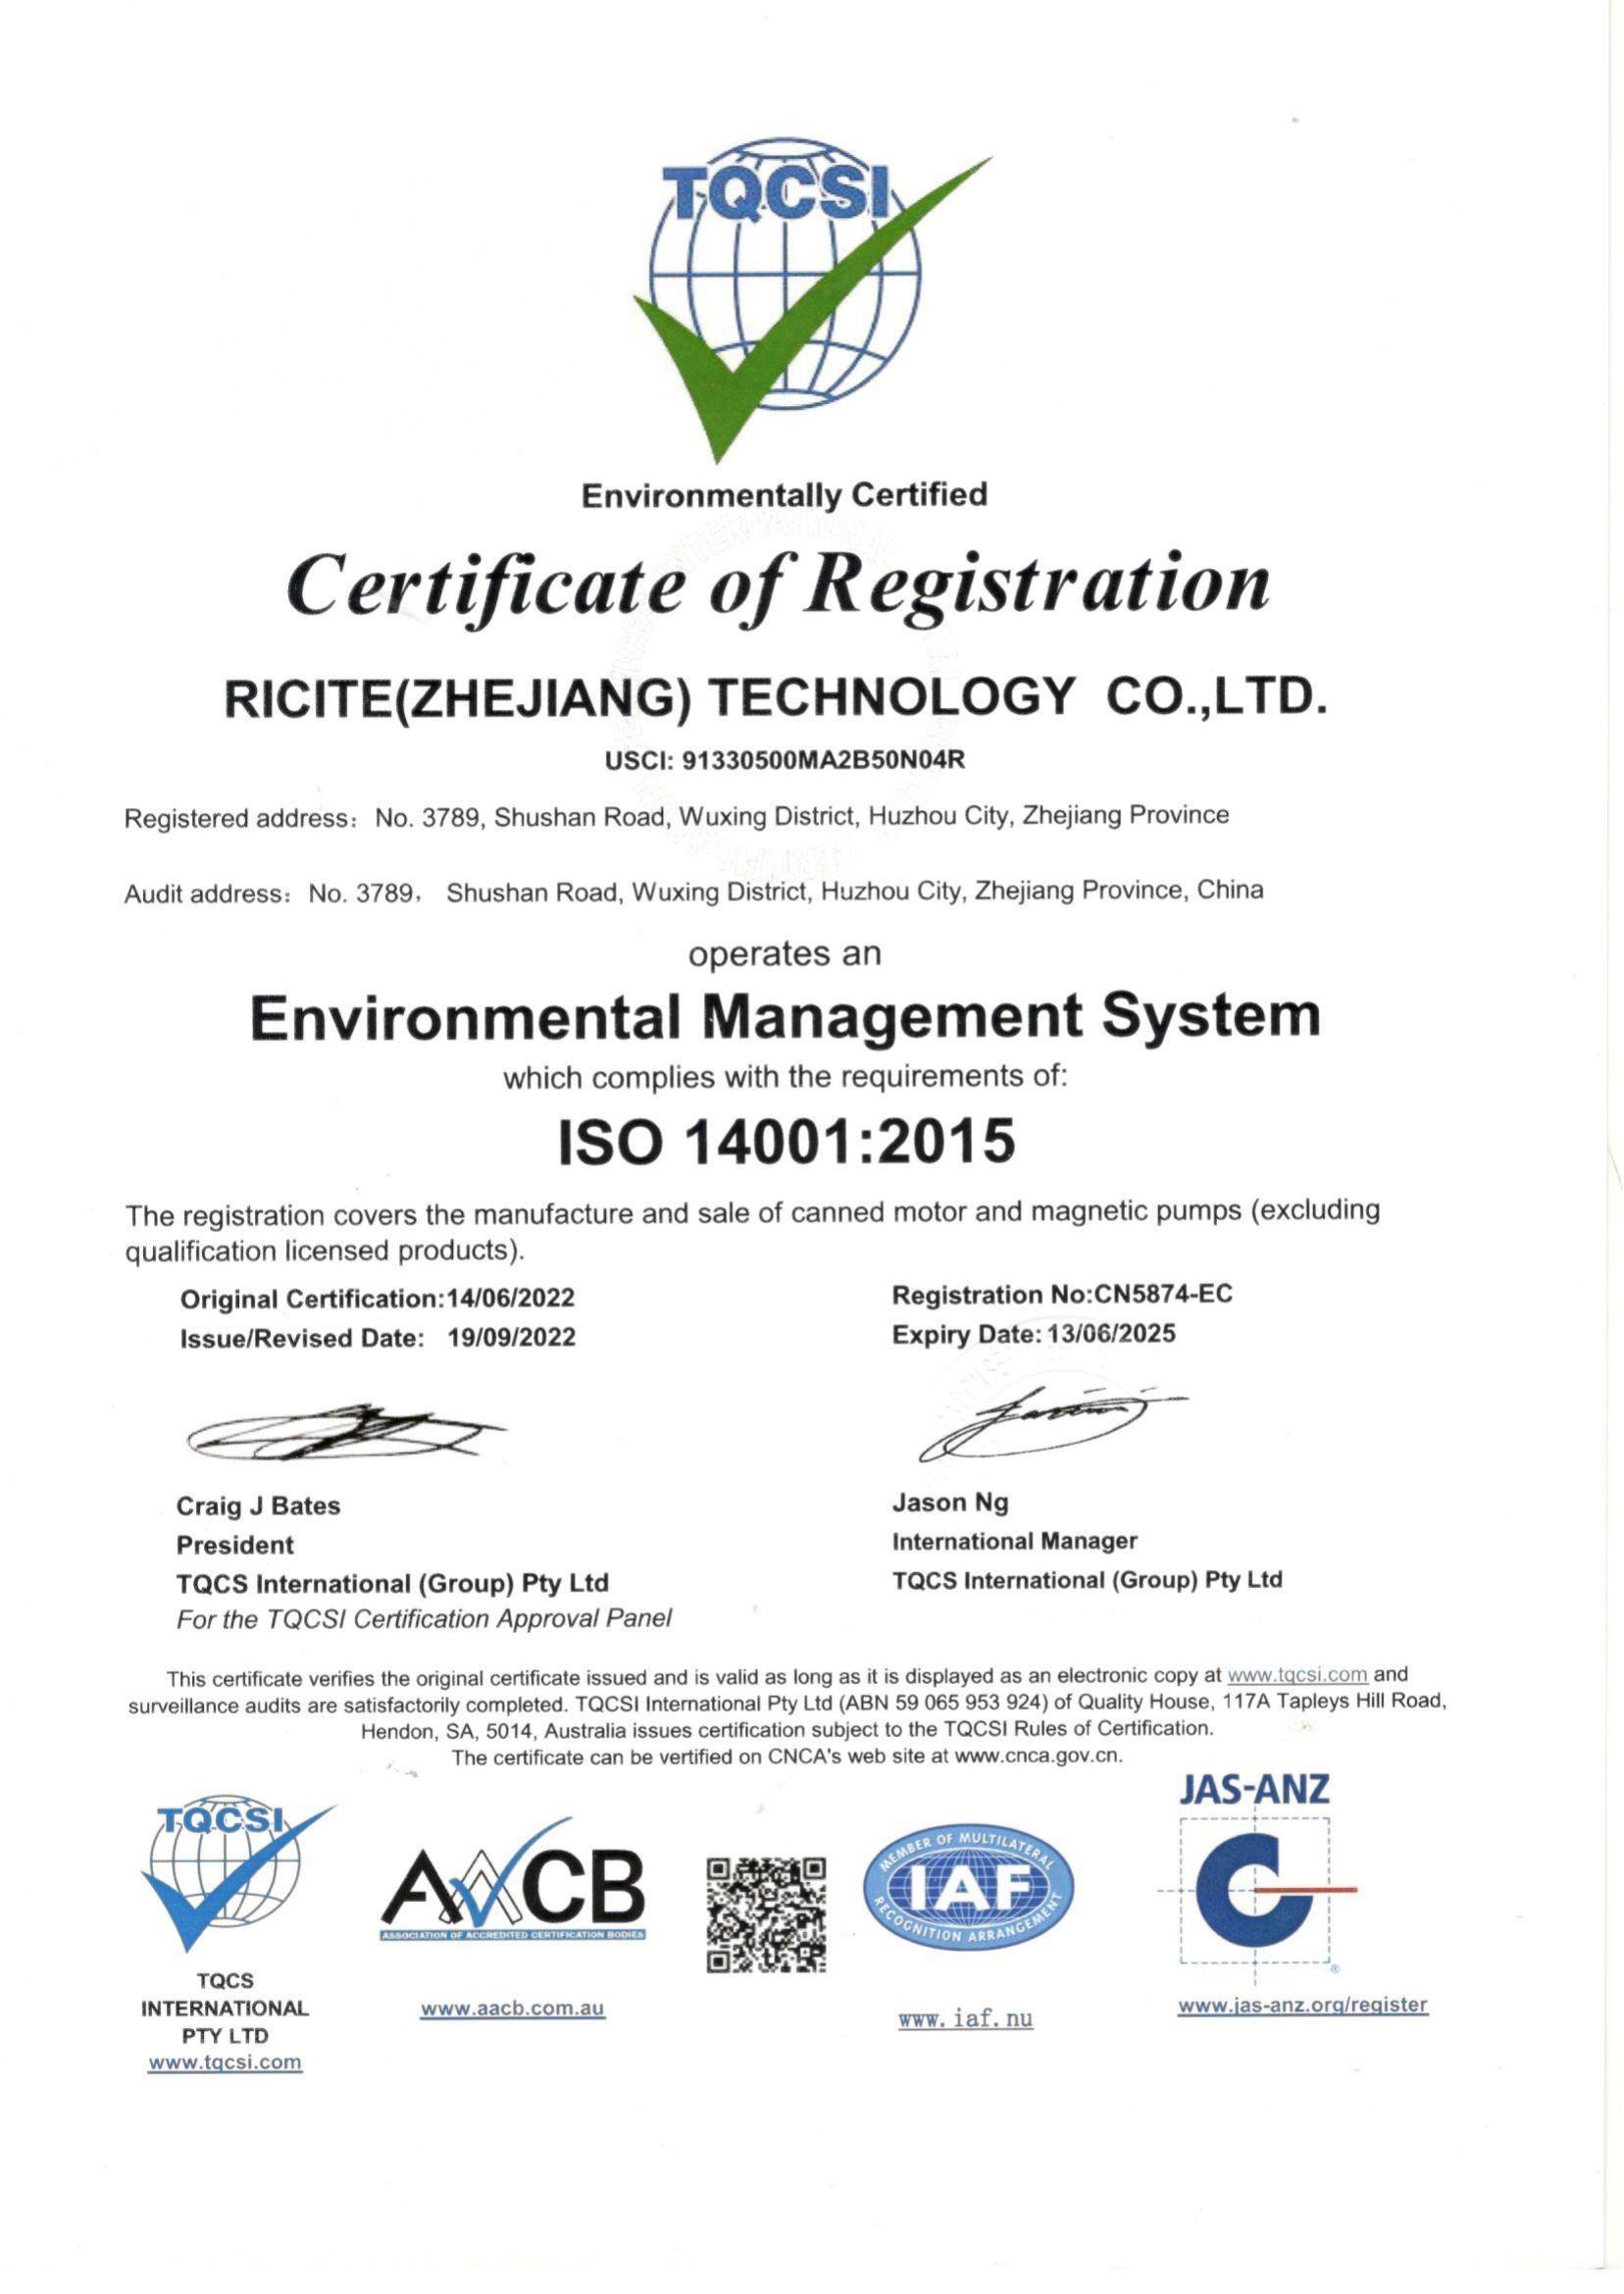 TQCSI ISO14001:2015 Environmentally Certified Certificate of Registration